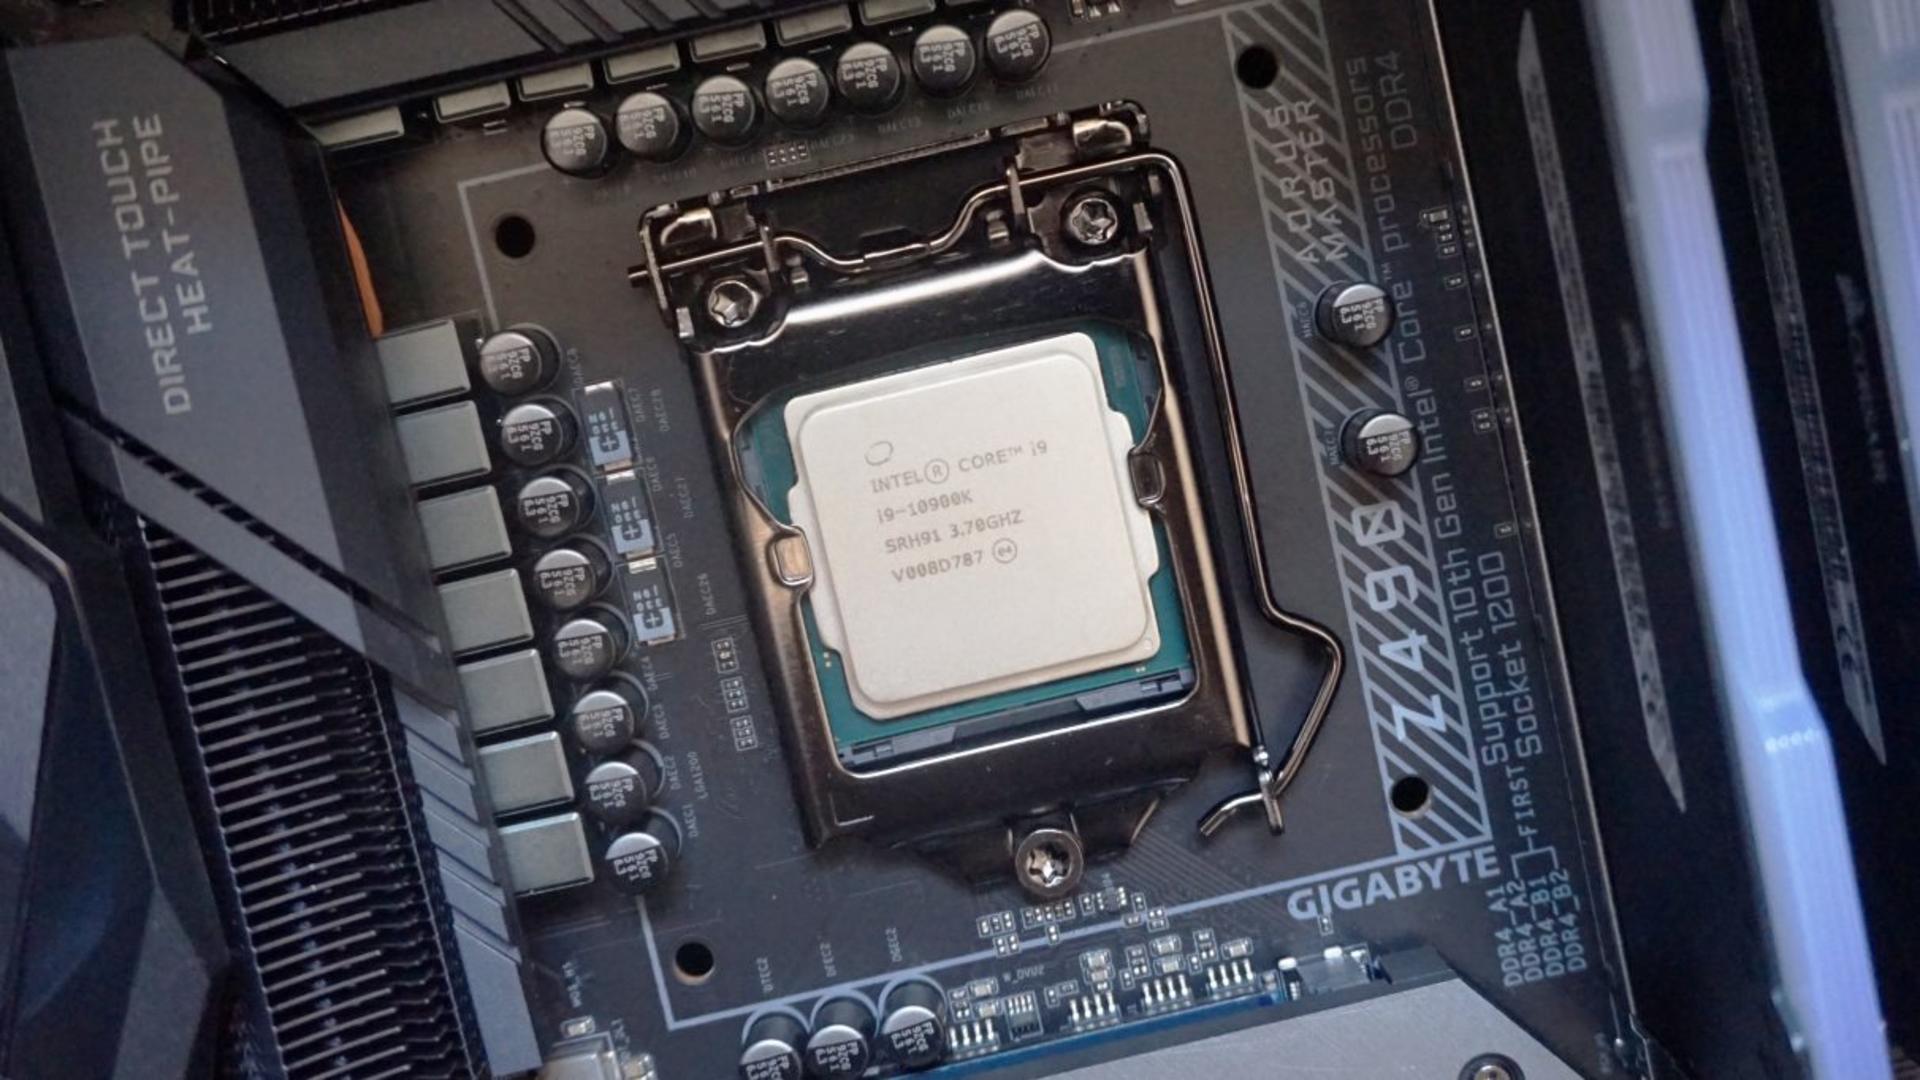 Intel suggests launching Core i9-10900KS, along with two other new Comet Lake-S processors